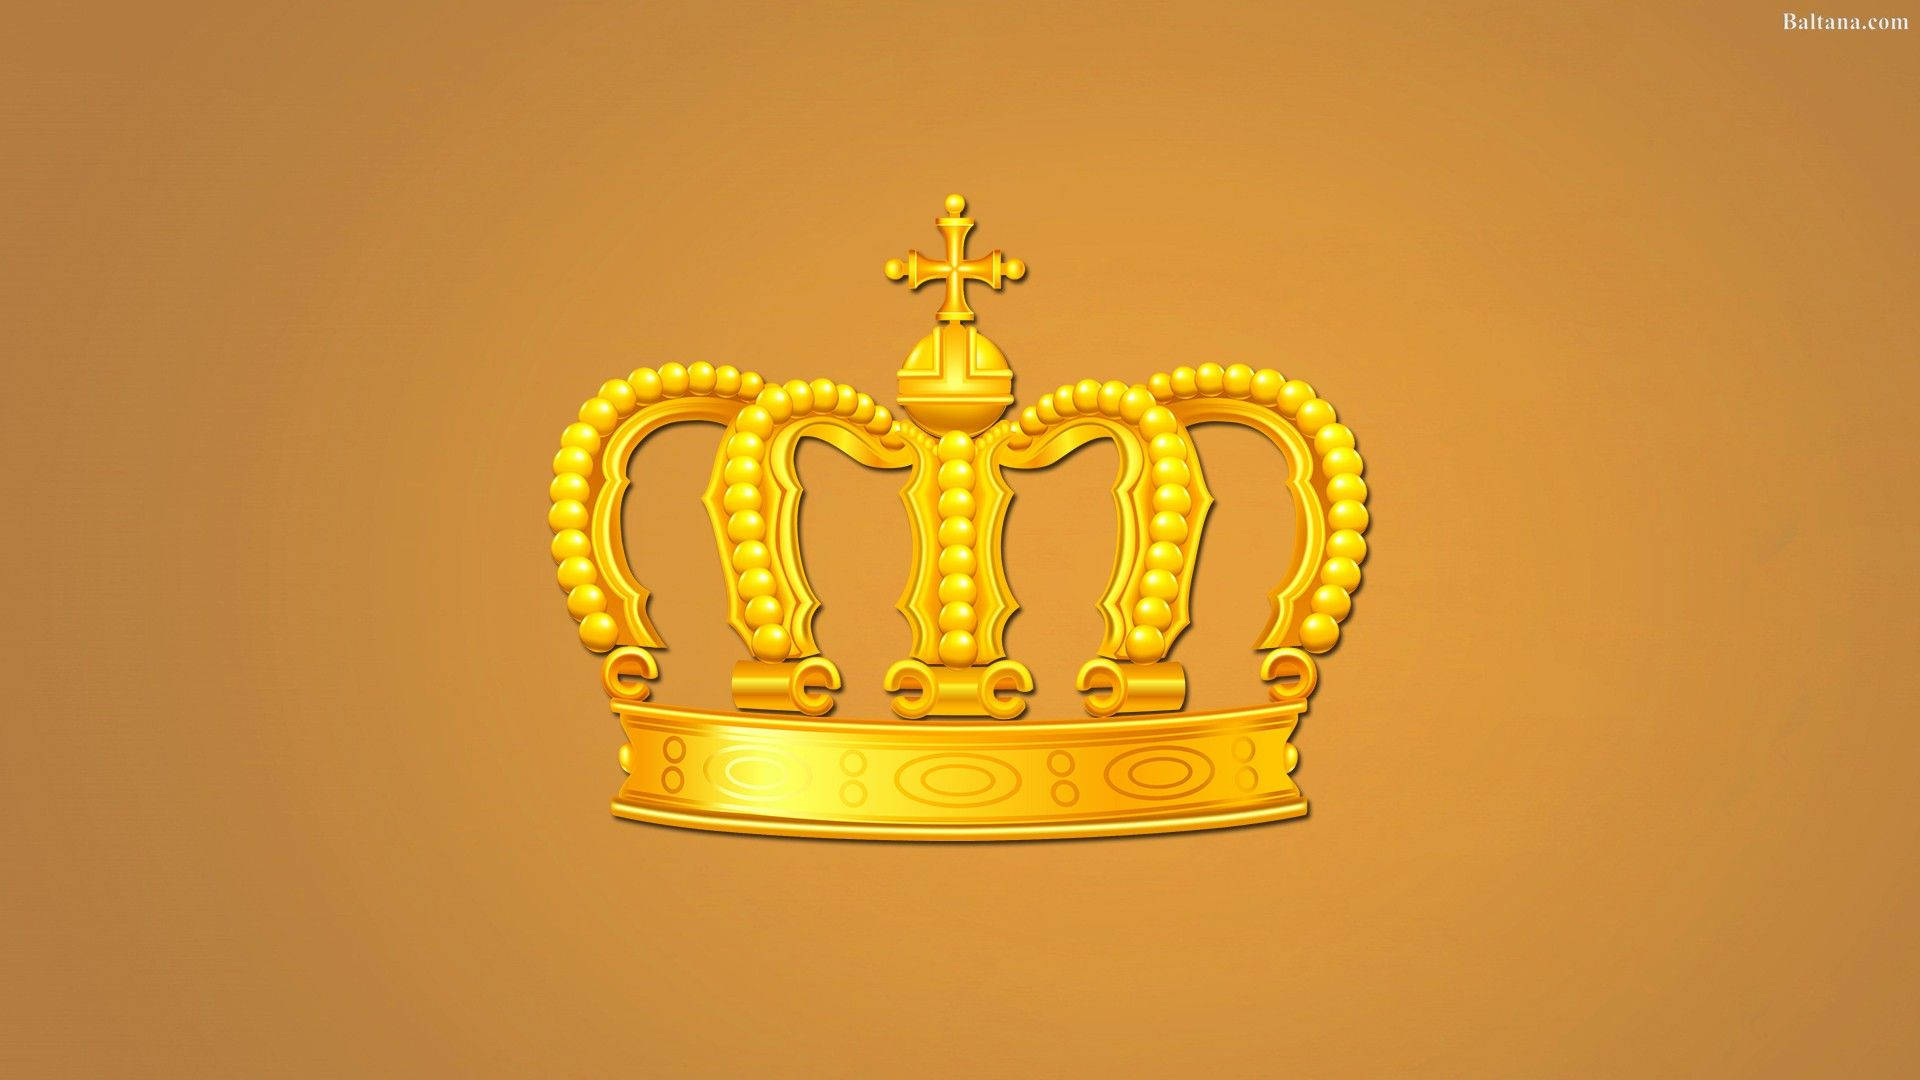 Free King And Queen Crown Wallpaper Downloads, [100+] King And Queen Crown  Wallpapers for FREE 